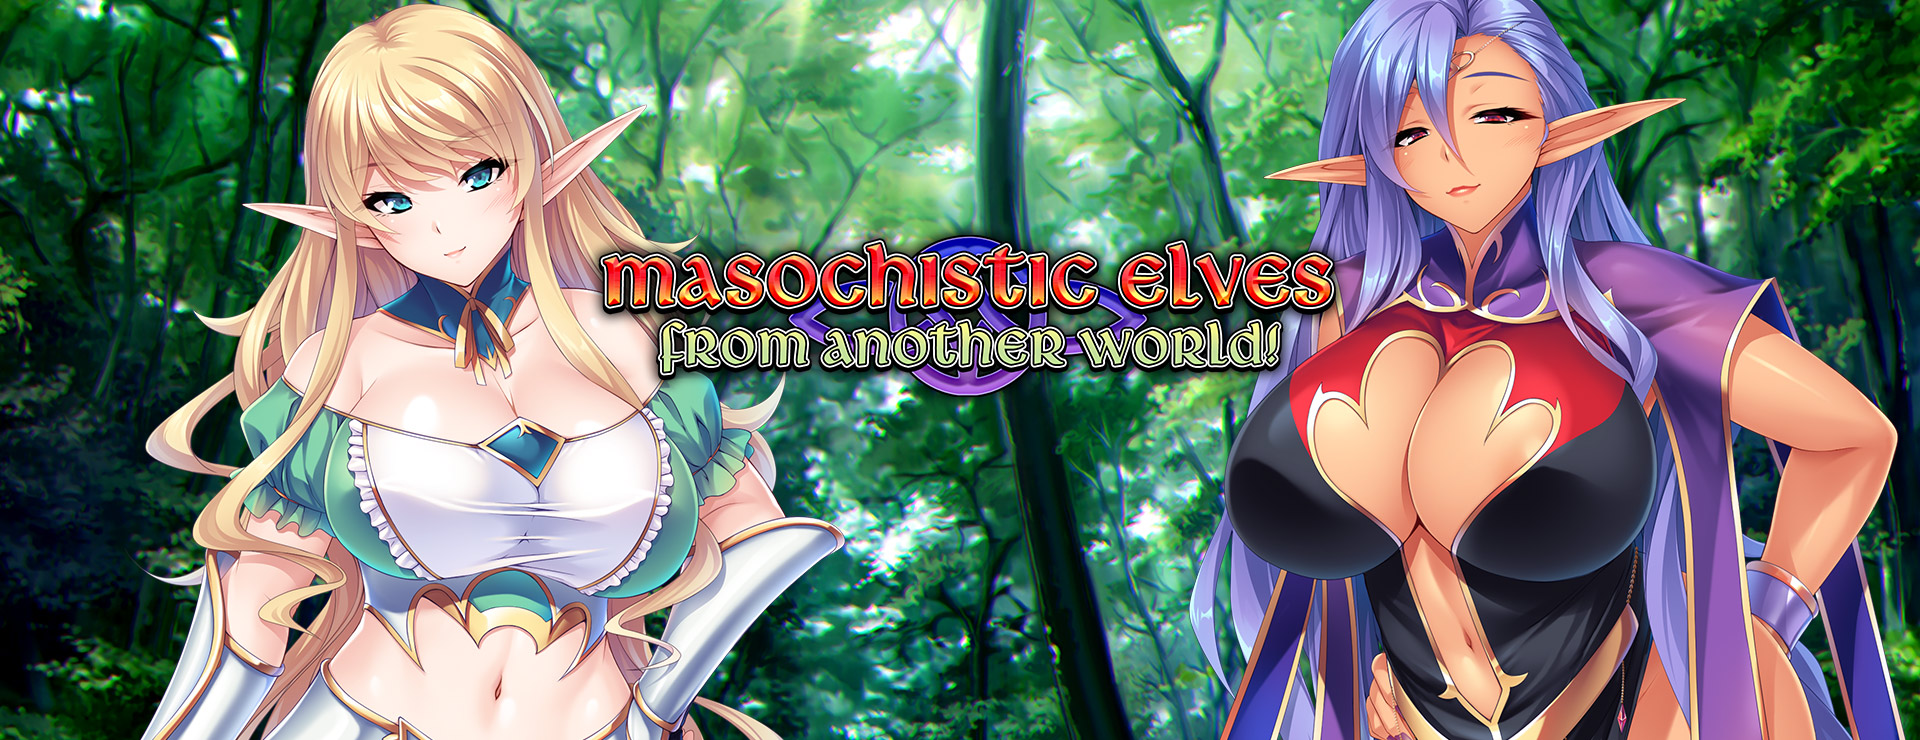 Masochistic Elves from Another World - Novela Visual Juego